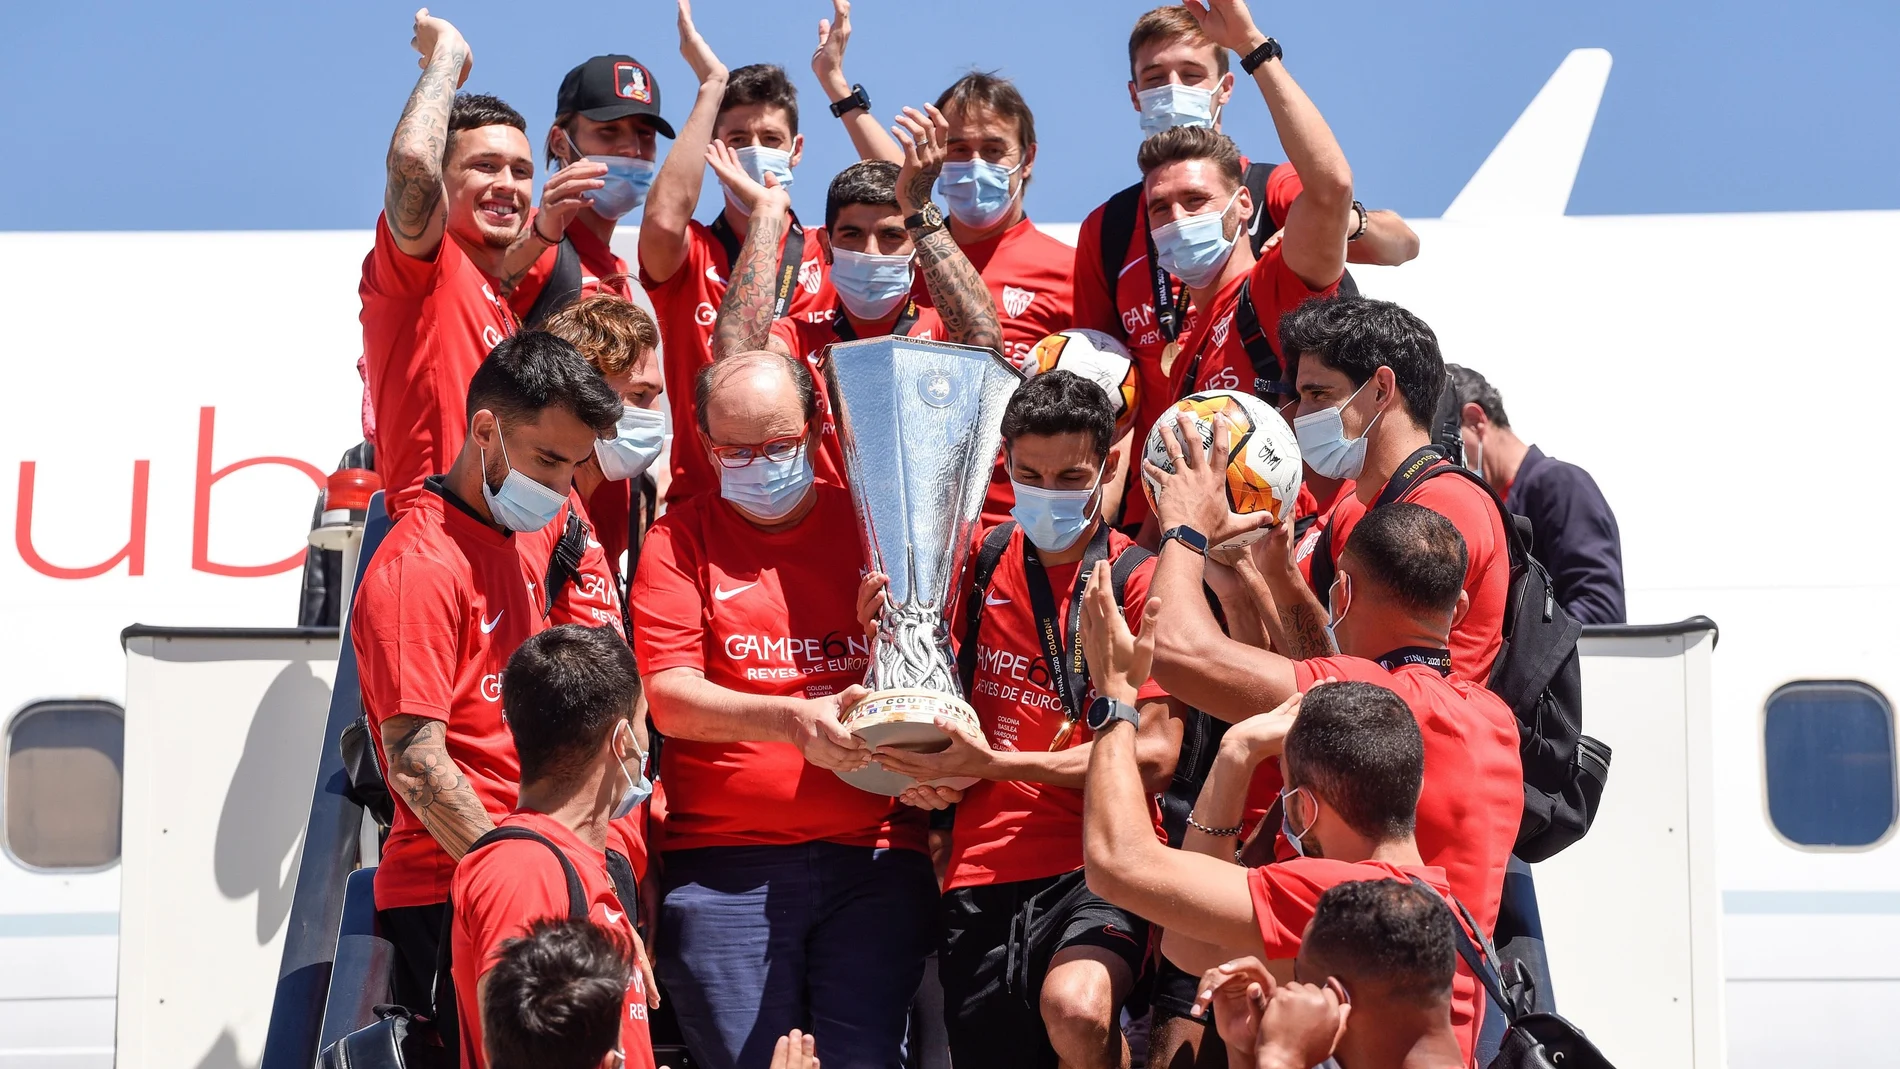 Sevilla with the trophy as they arrive back in Seville after winning the Europa League